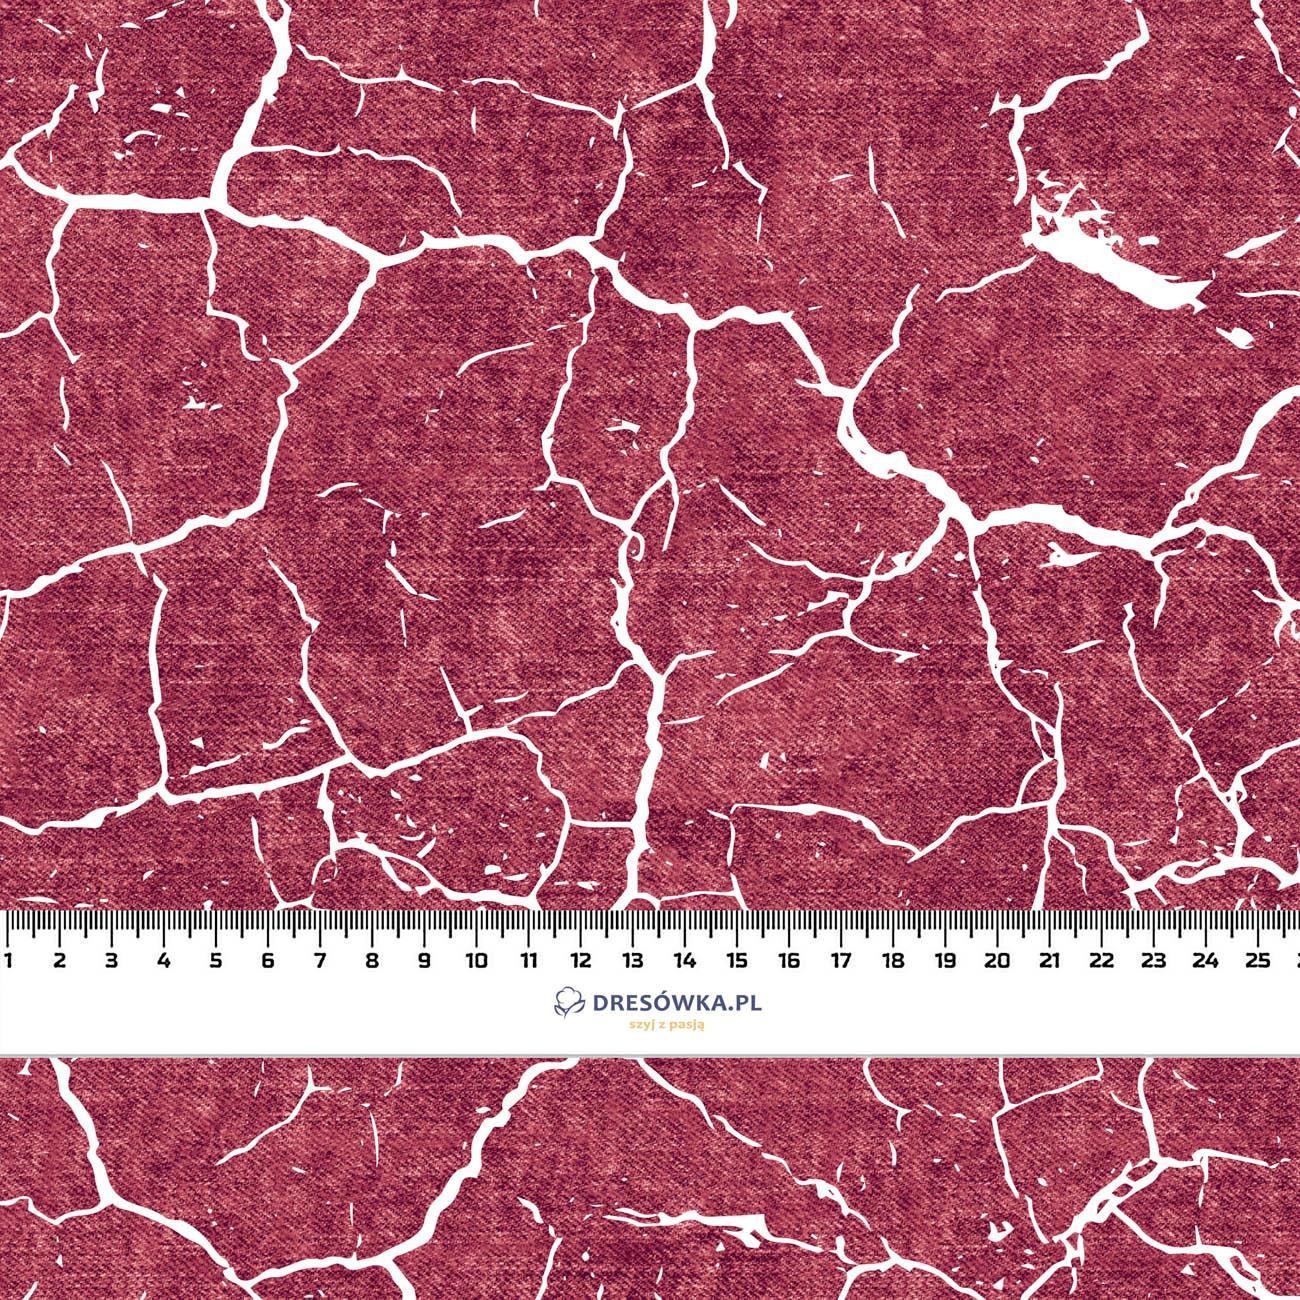 SCORCHED EARTH (white) / ACID WASH (maroon) - looped knit fabric